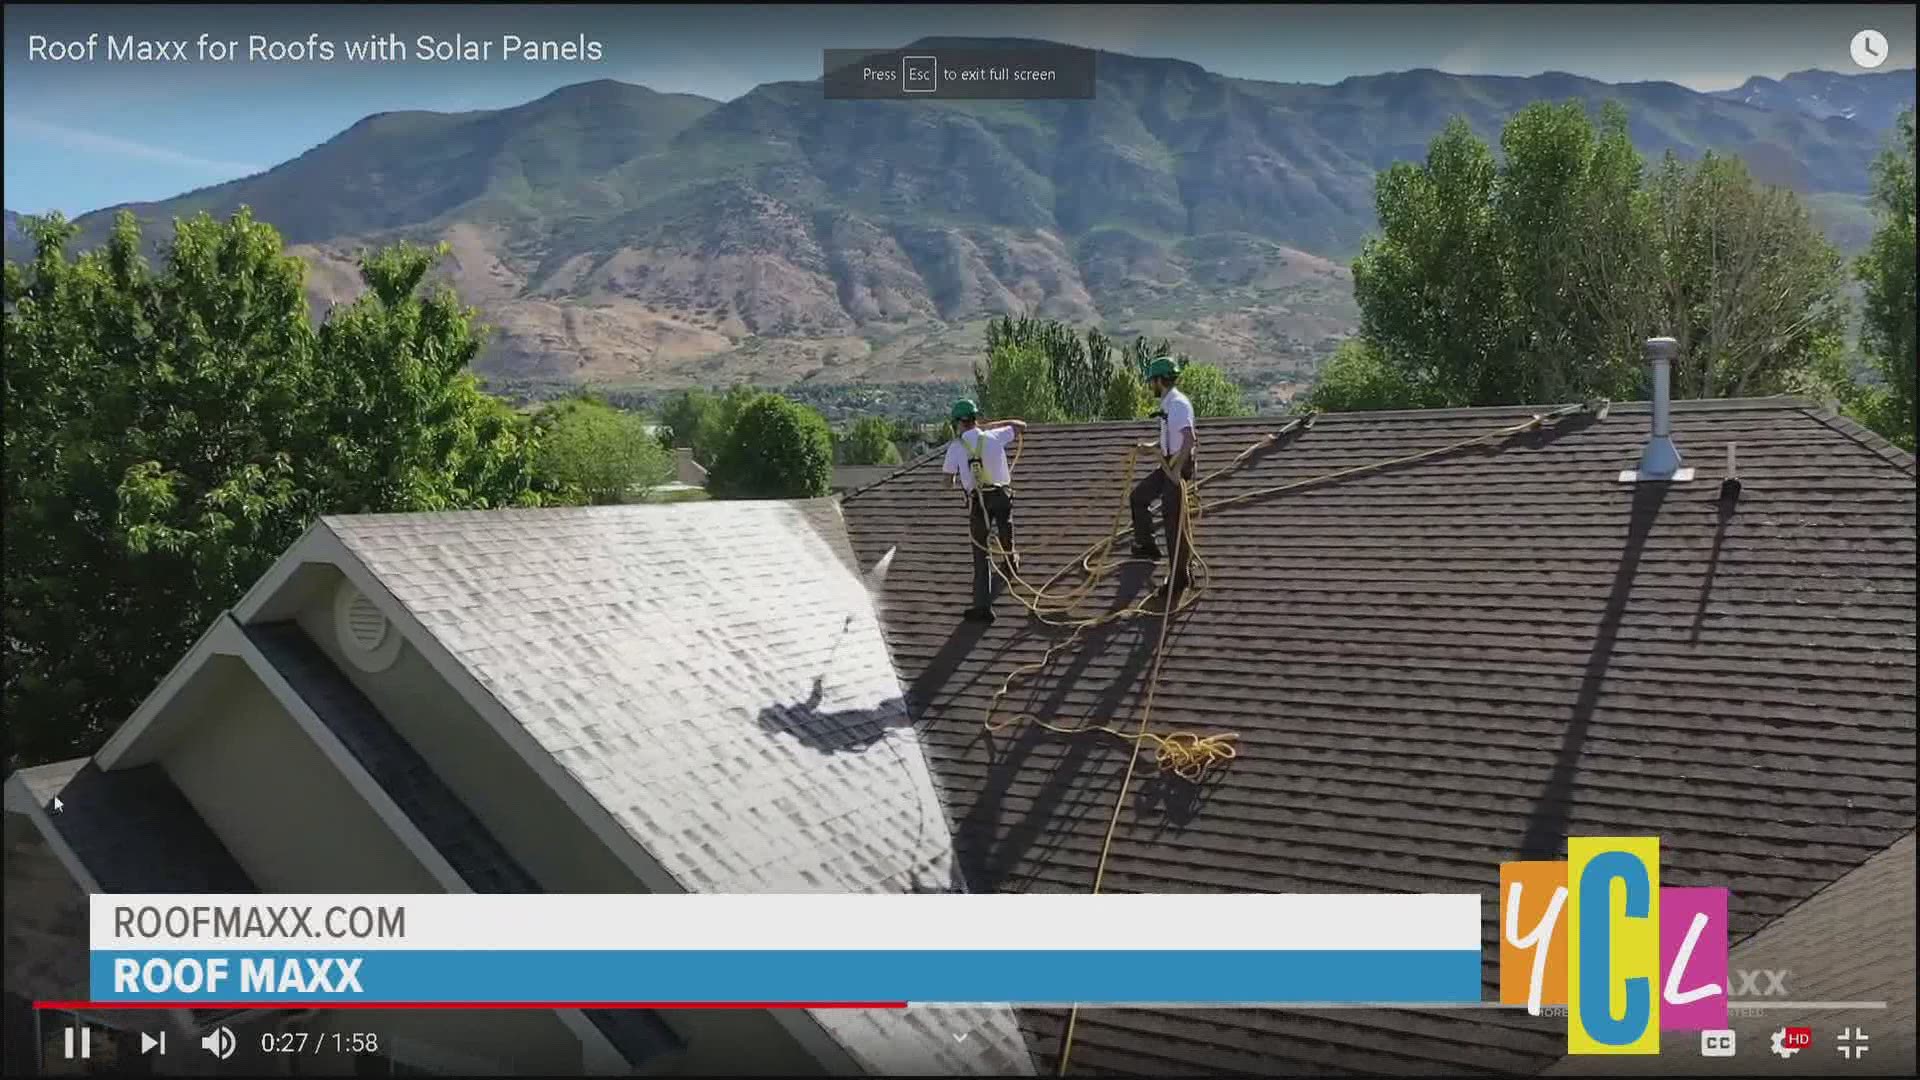 Technology to rejuvenate and restore the flexibility and strength of shingles, adding five years to the roof's life. This segment was paid for by RoofMaxx.